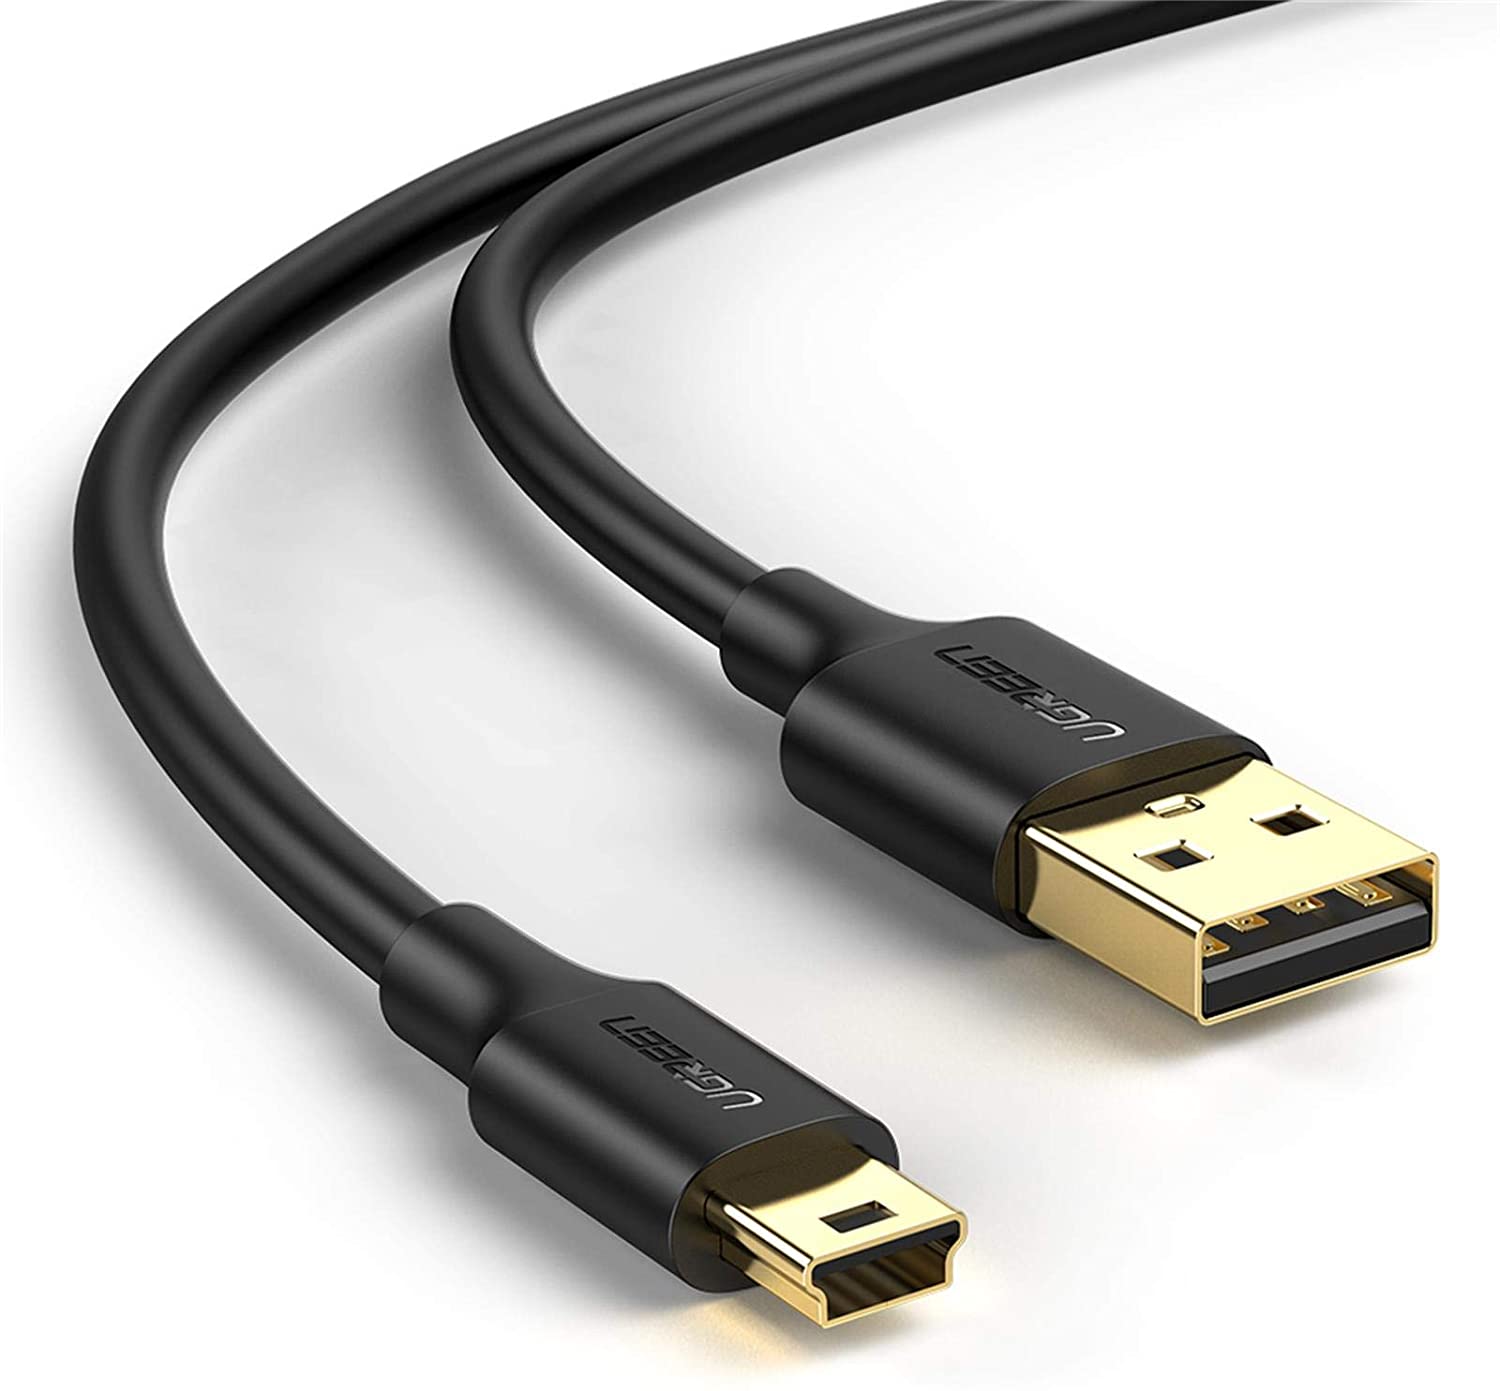 What is a USB cable